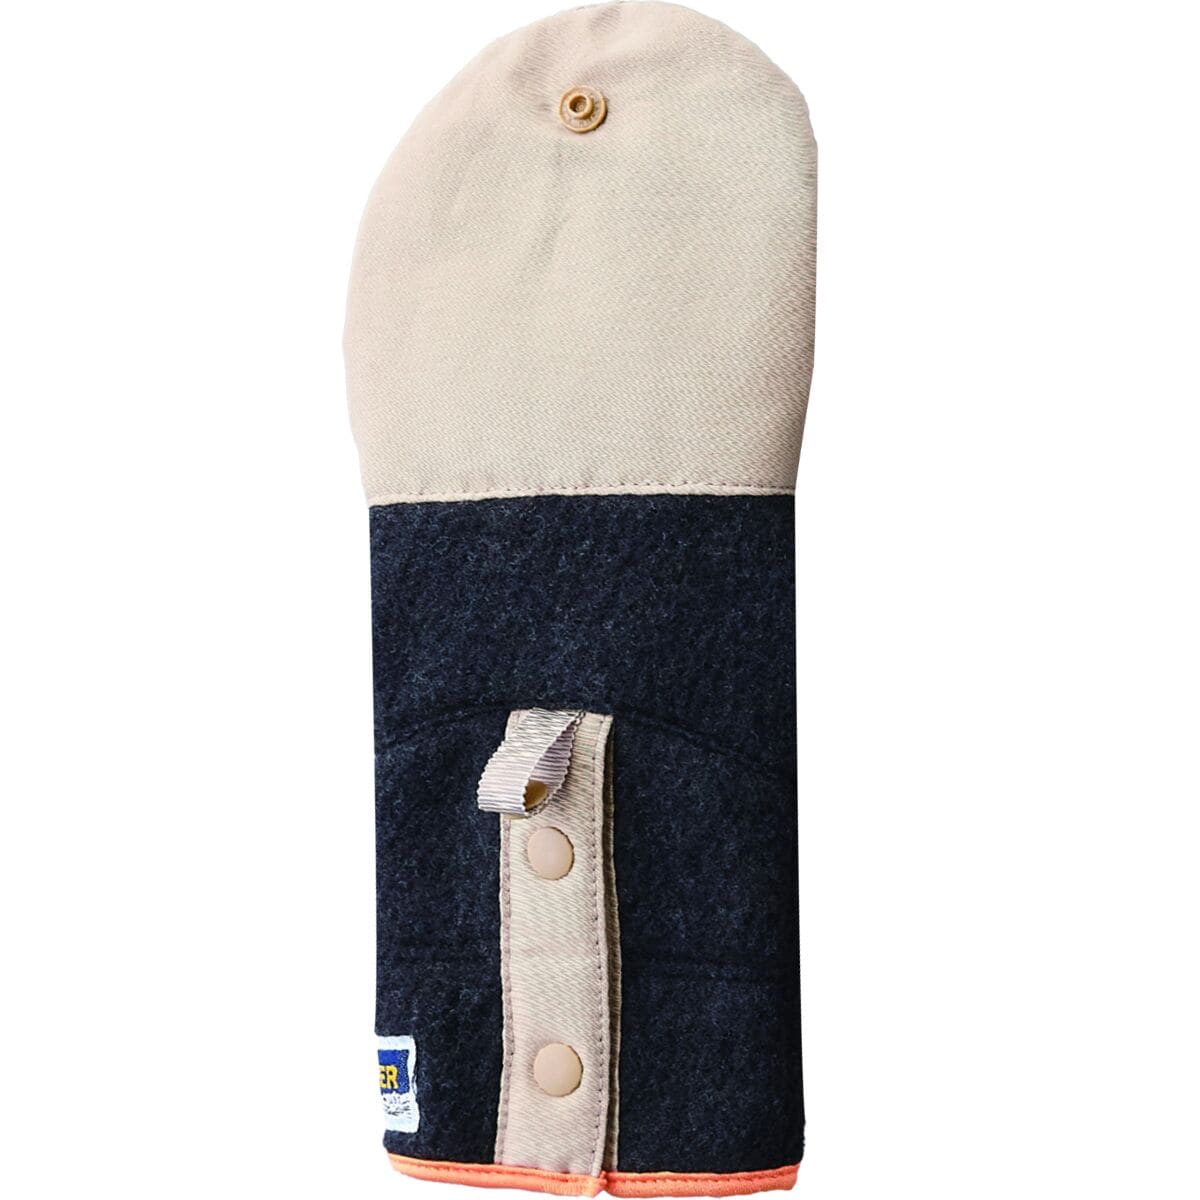 Elmer by Swany Eco Cover Glove - Men's